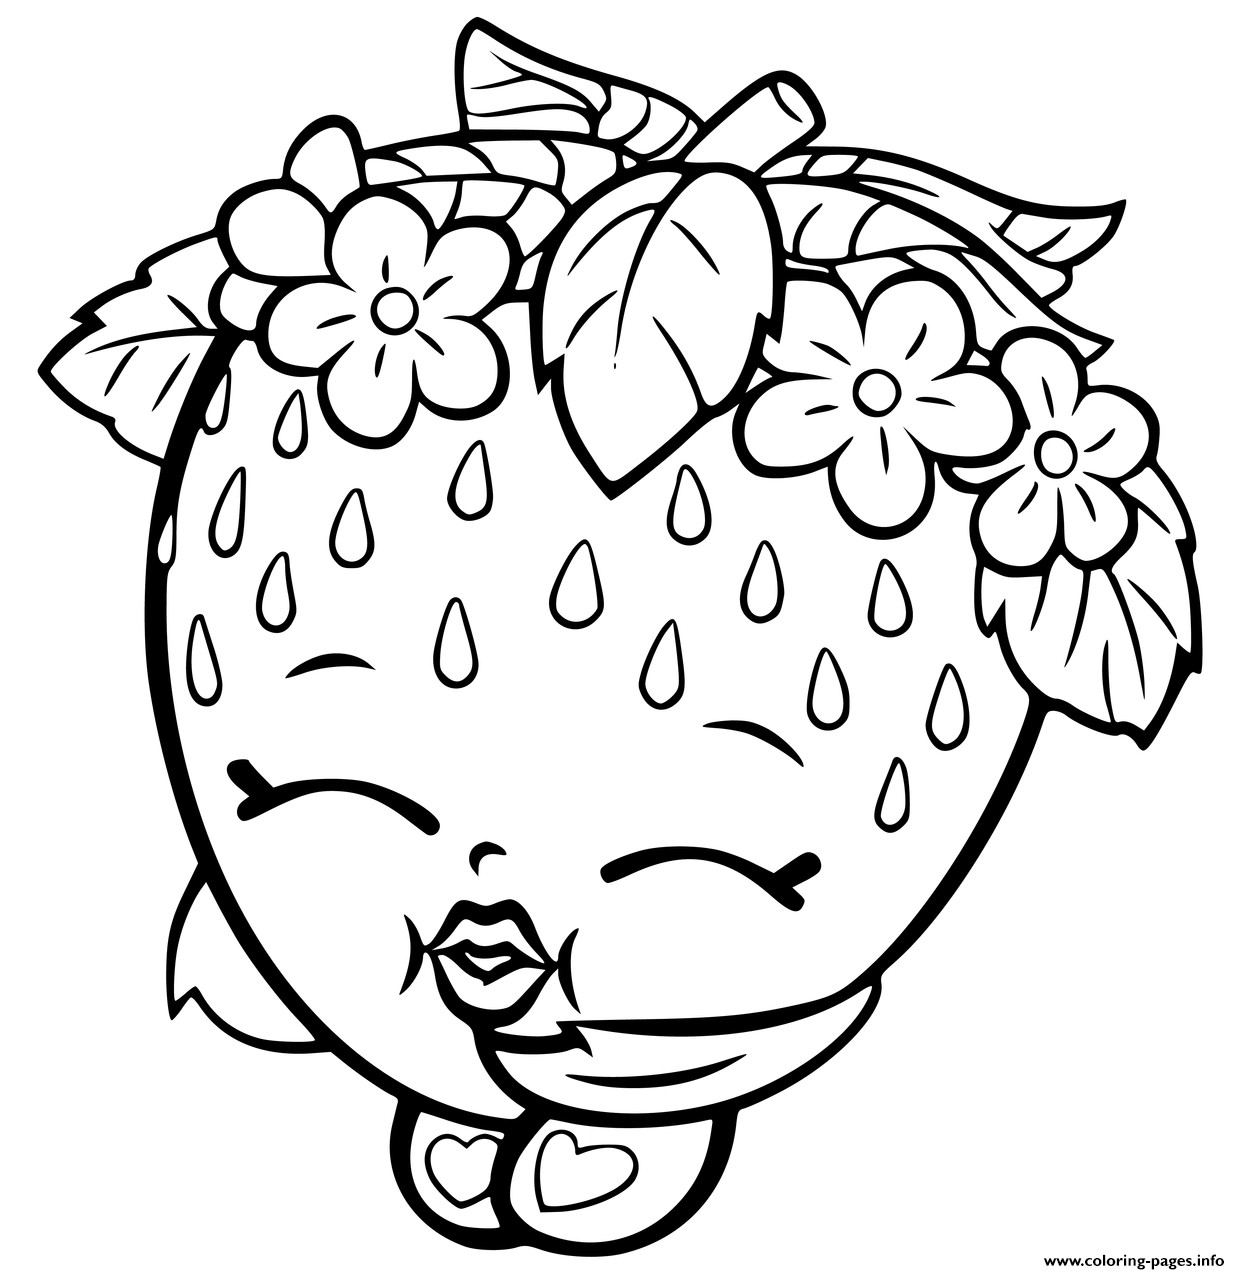 Coloring Sheets For Girls Flower With The Name Laci
 Shopkins Halloween Coloring Pages – Festival Collections